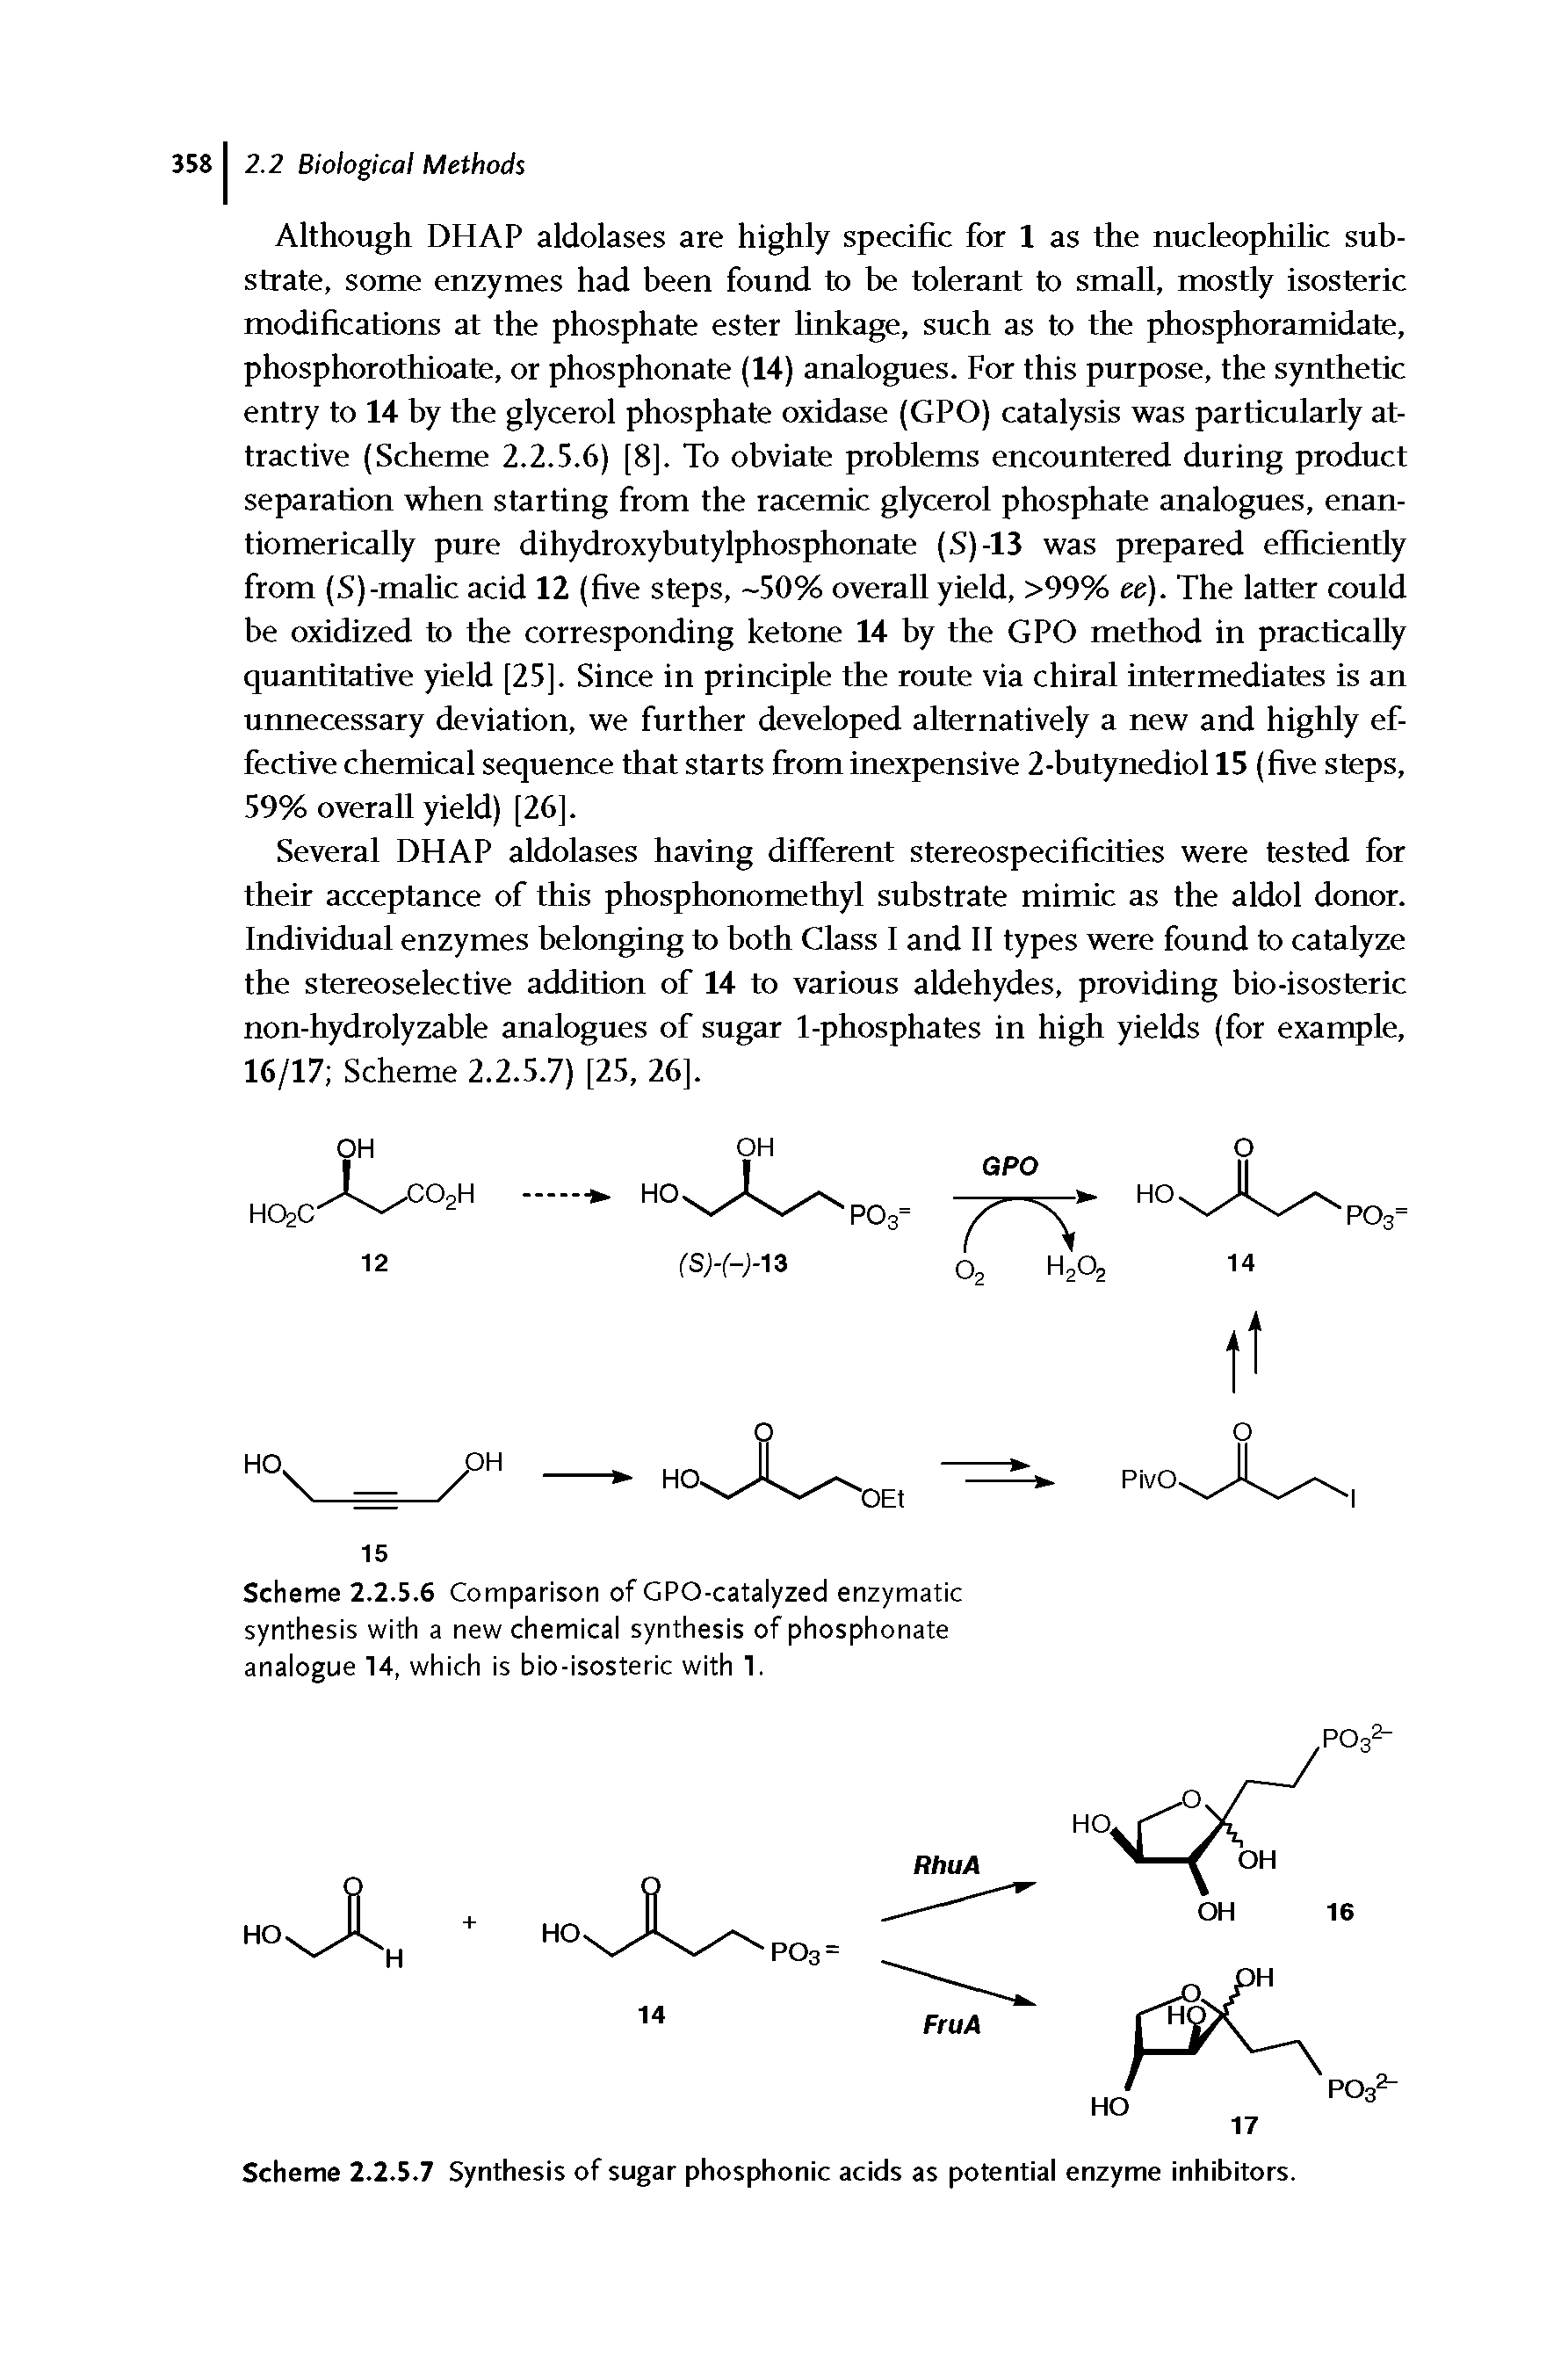 Scheme 2.2.S.7 Synthesis of sugar phosphonic acids as potential enzyme inhibitors.